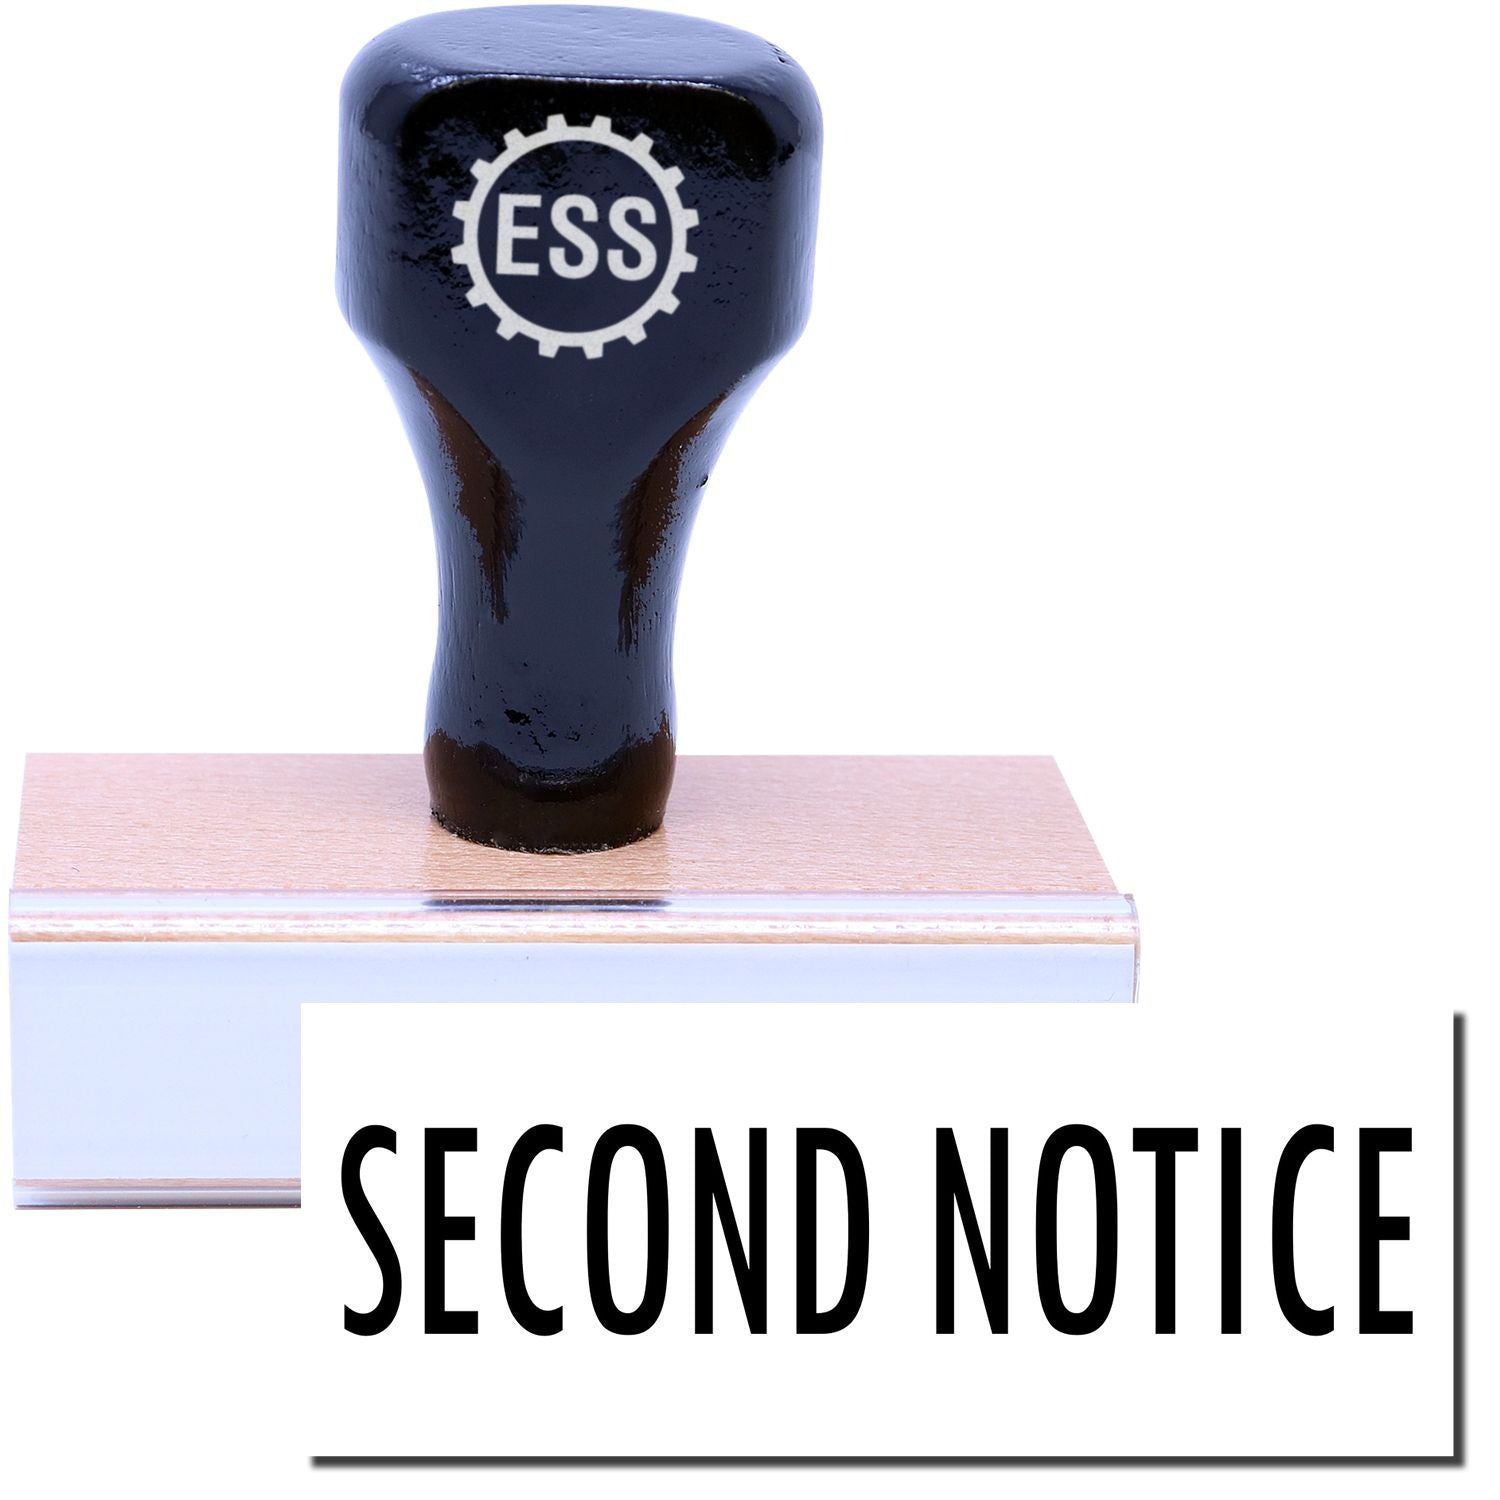 A stock office rubber stamp with a stamped image showing how the text "SECOND NOTICE" in a large font is displayed after stamping.